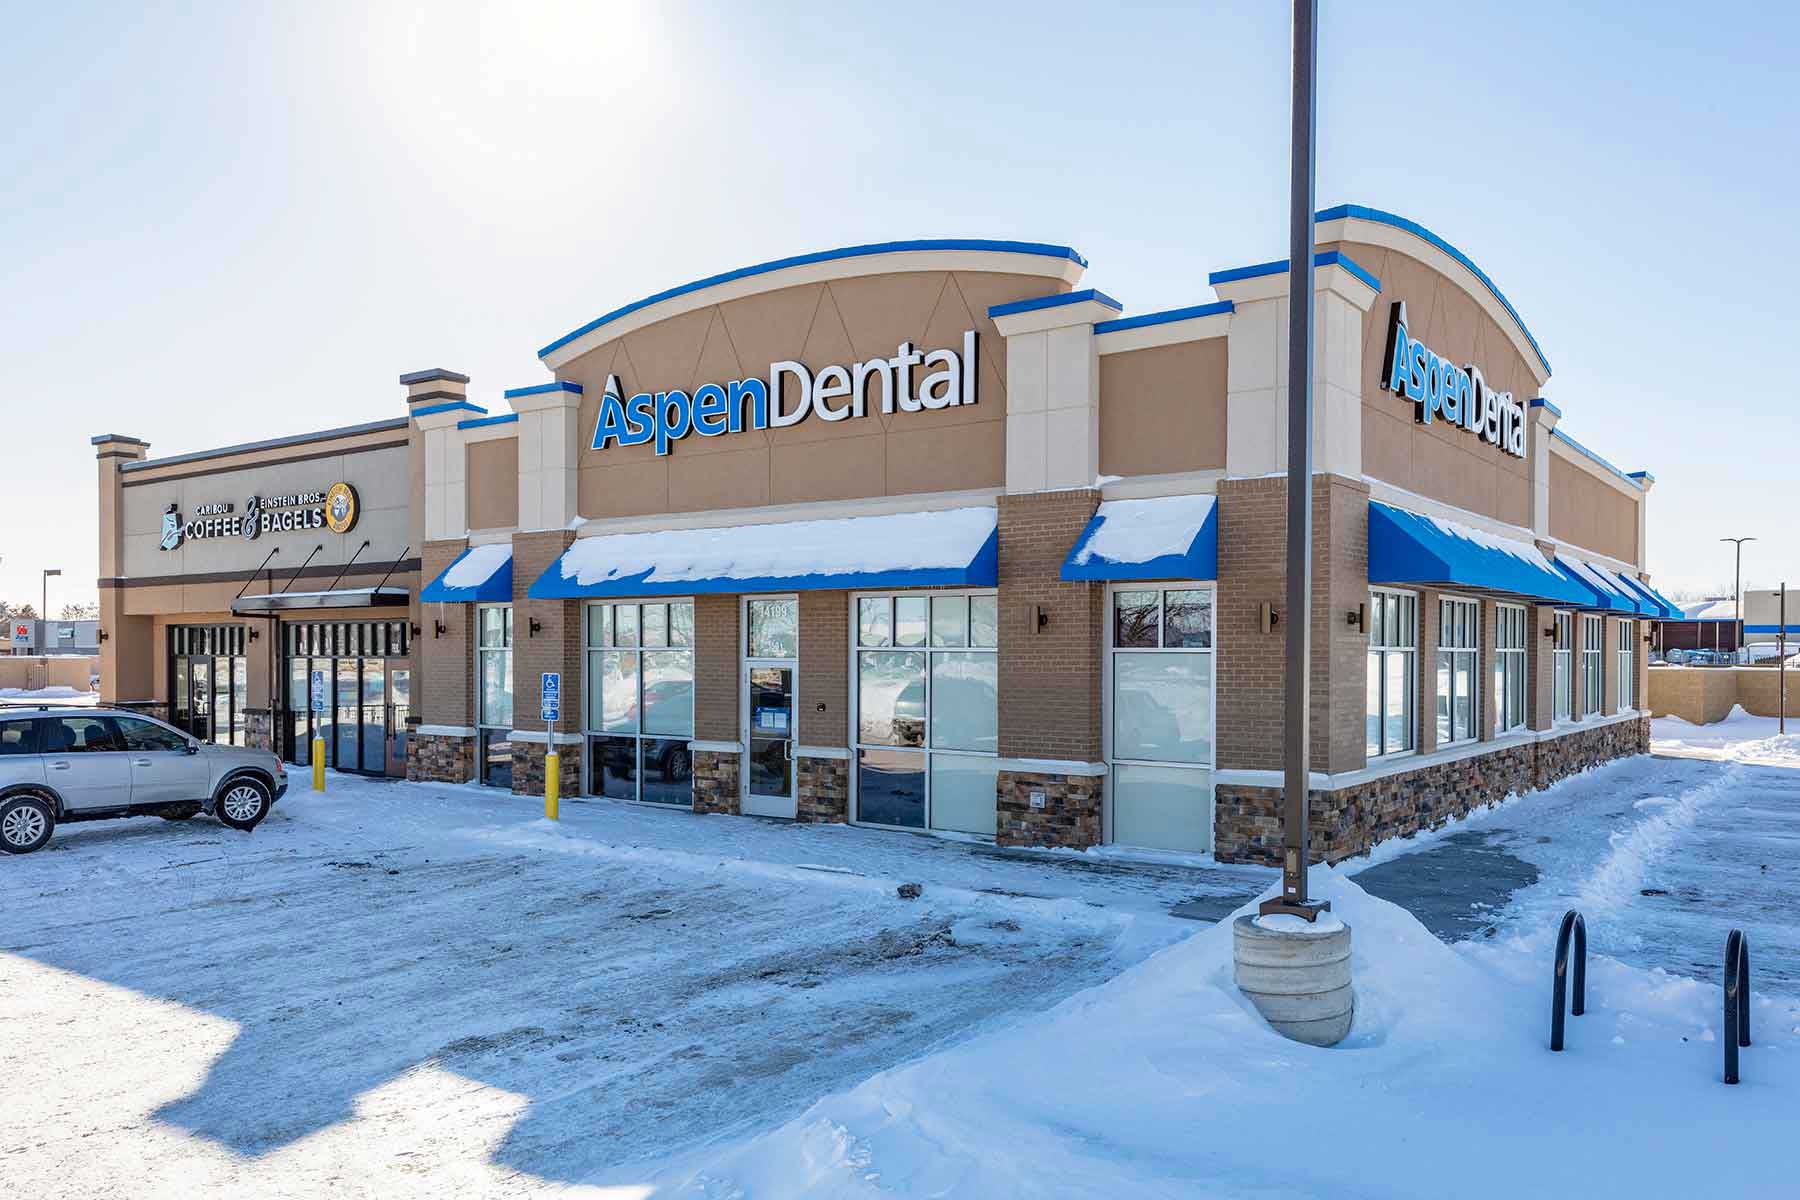 Aspen Dental and Caribou Coffee with Einstein Bagels Building